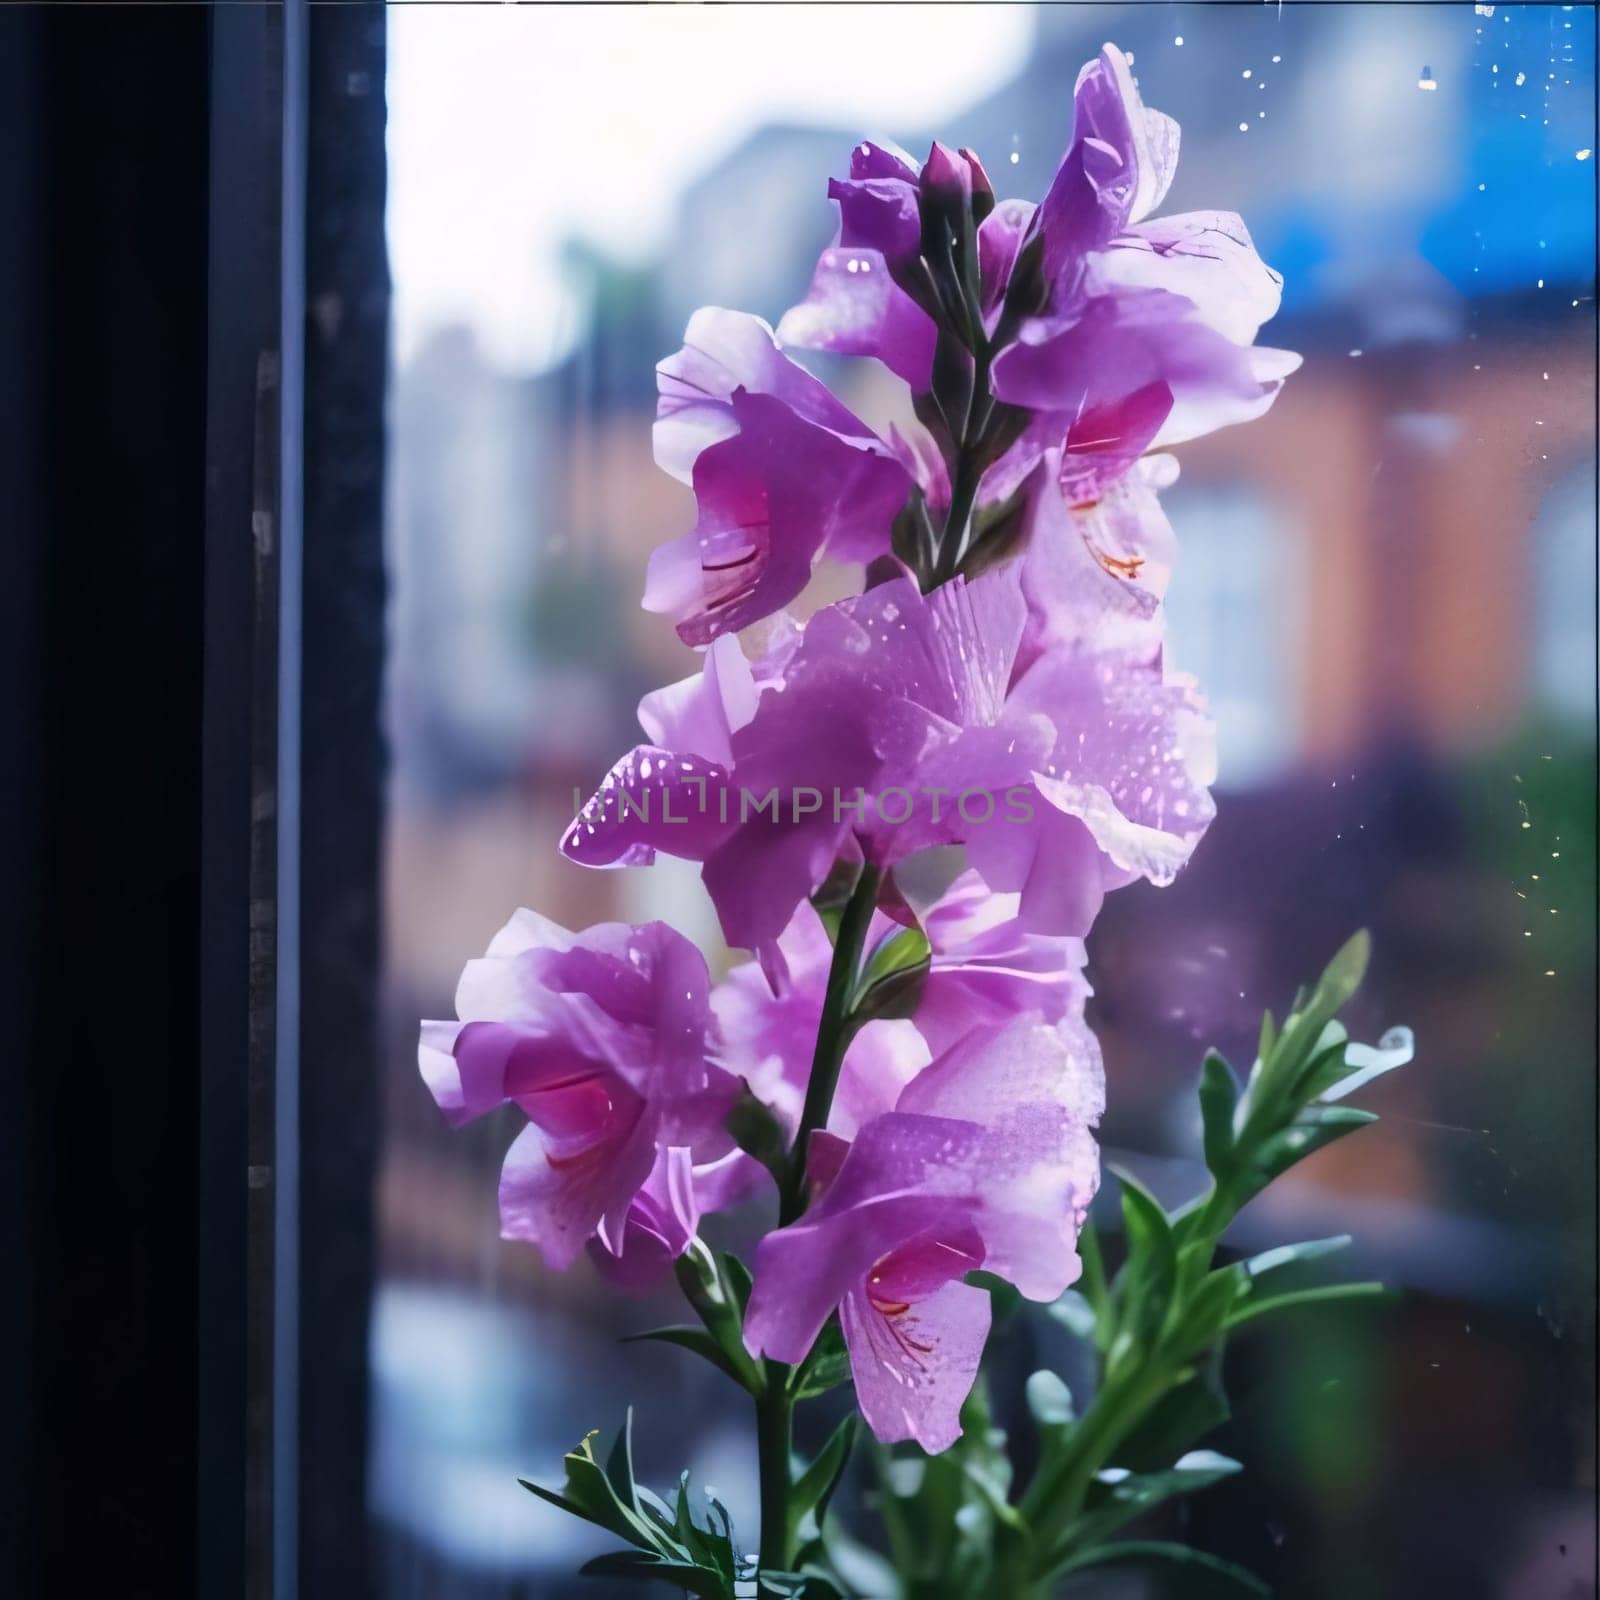 Pink flowers, window in the background. Flowering flowers, a symbol of spring, new life. A joyful time of nature waking up to life.